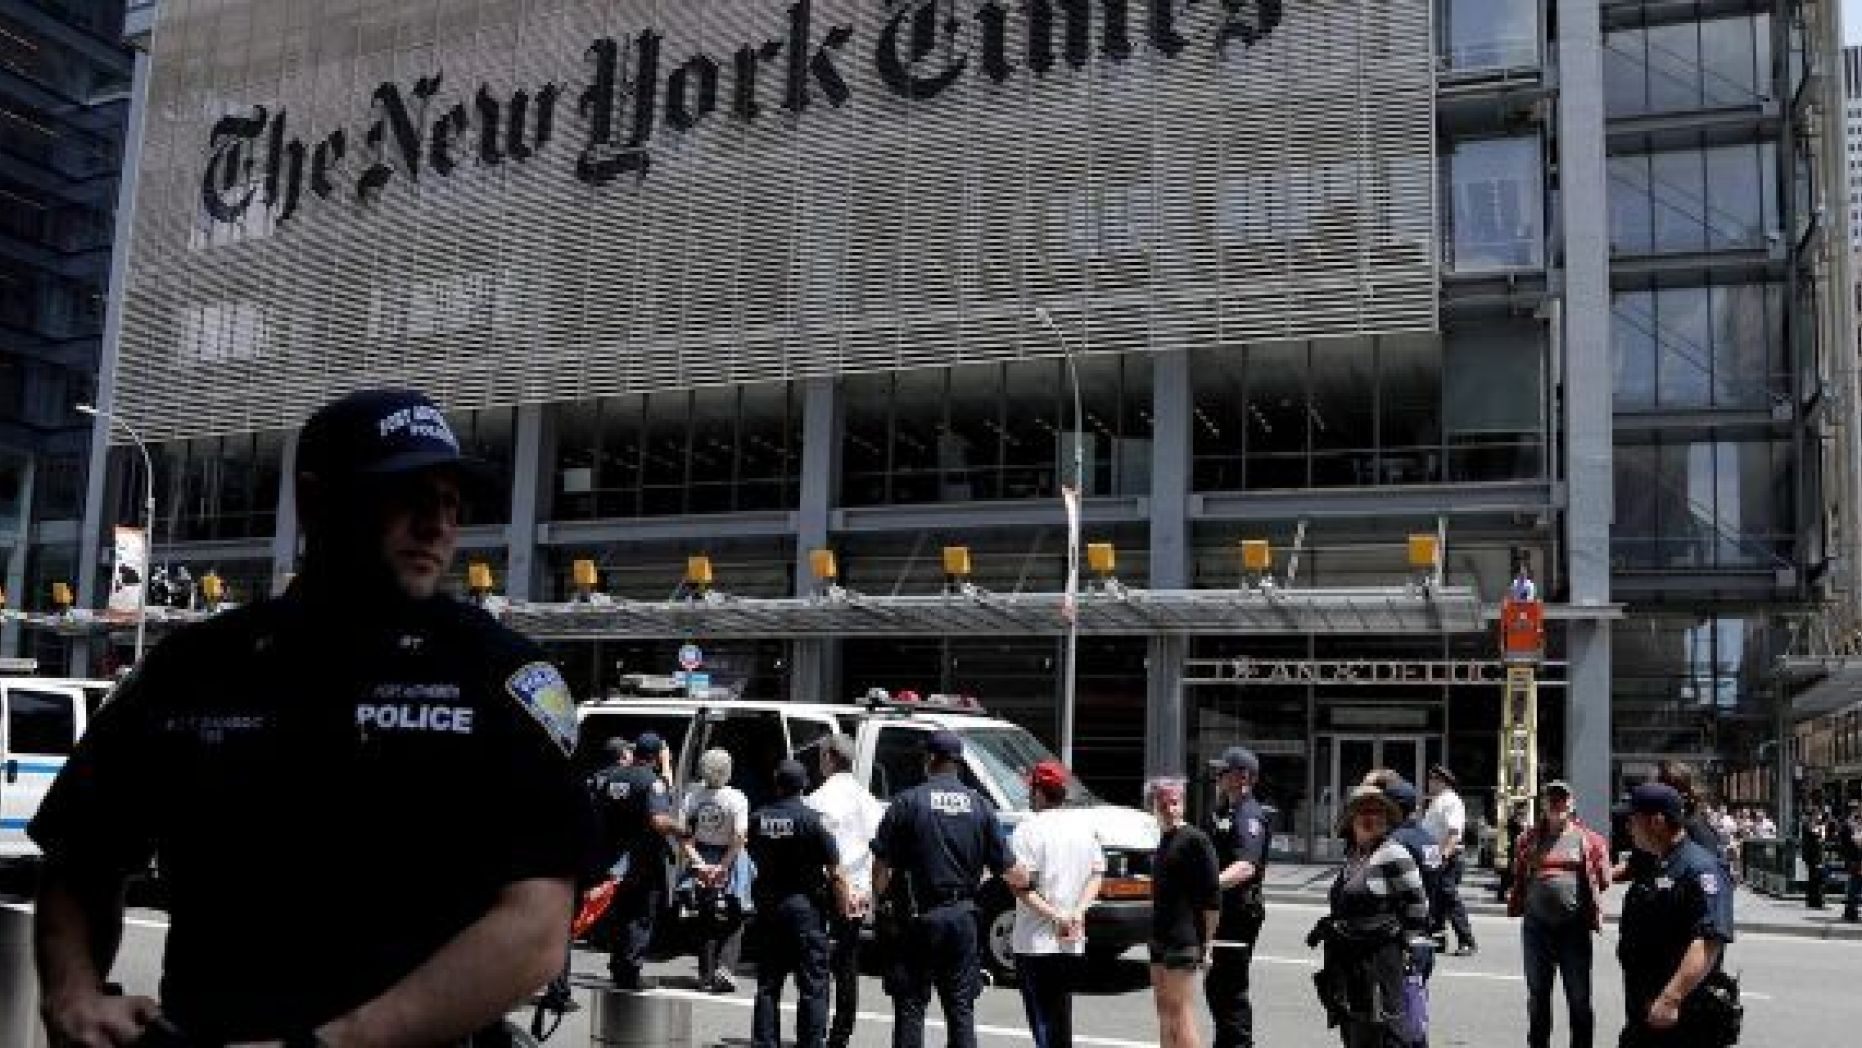 New York Times staffers “argue that the myth of America as the greatest nation on earth is at best outdated and at worst, wildly inaccurate” in new video. (AP Photo/Julio Cortez)